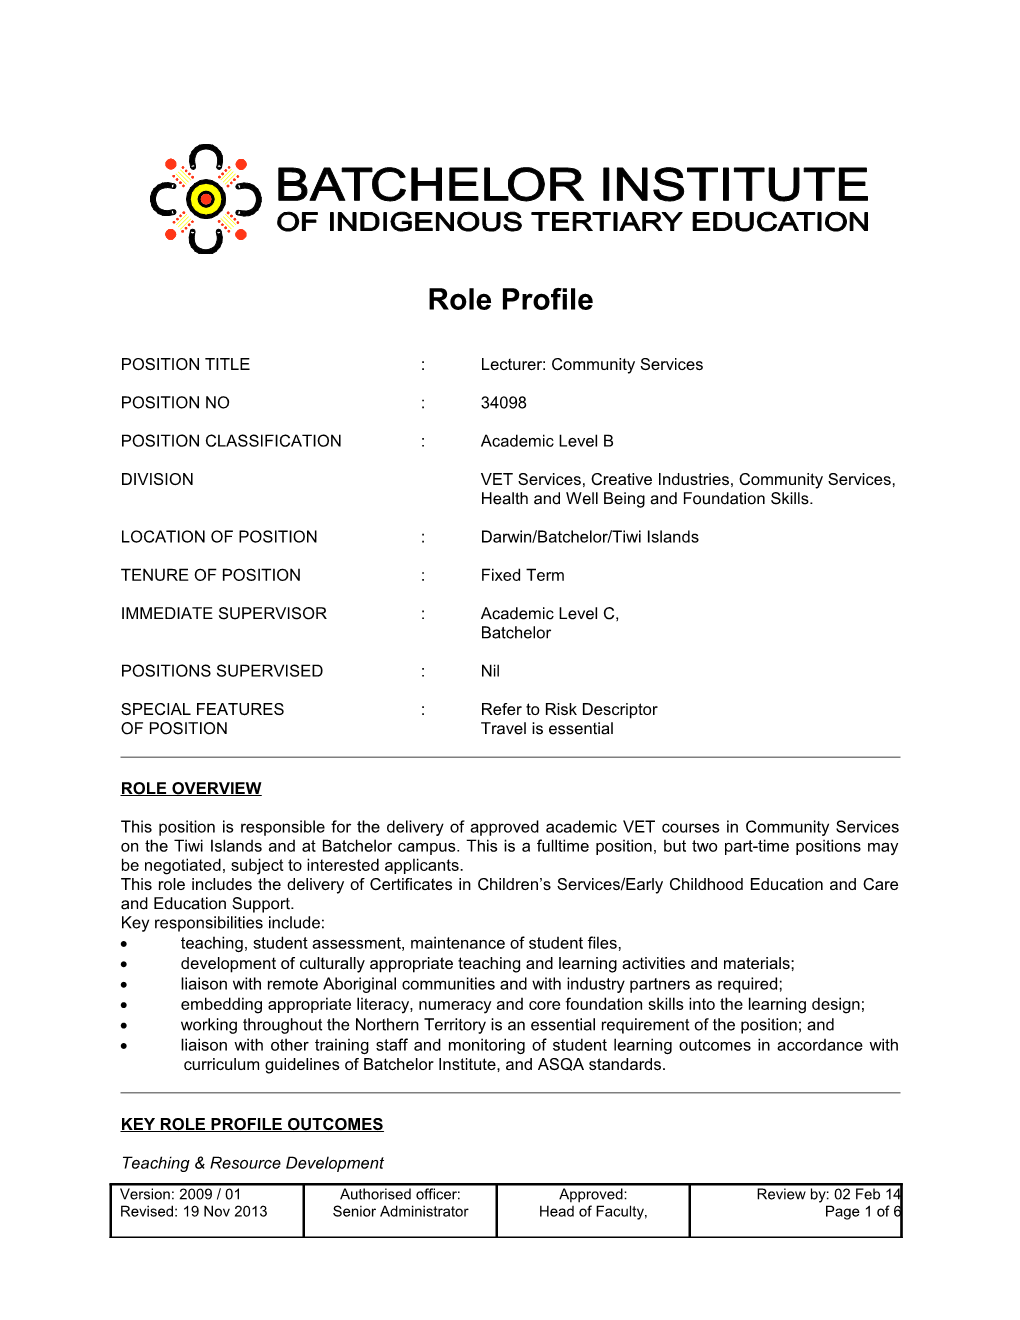 Batchelor Institute of Indigenous Tertiary Education s2